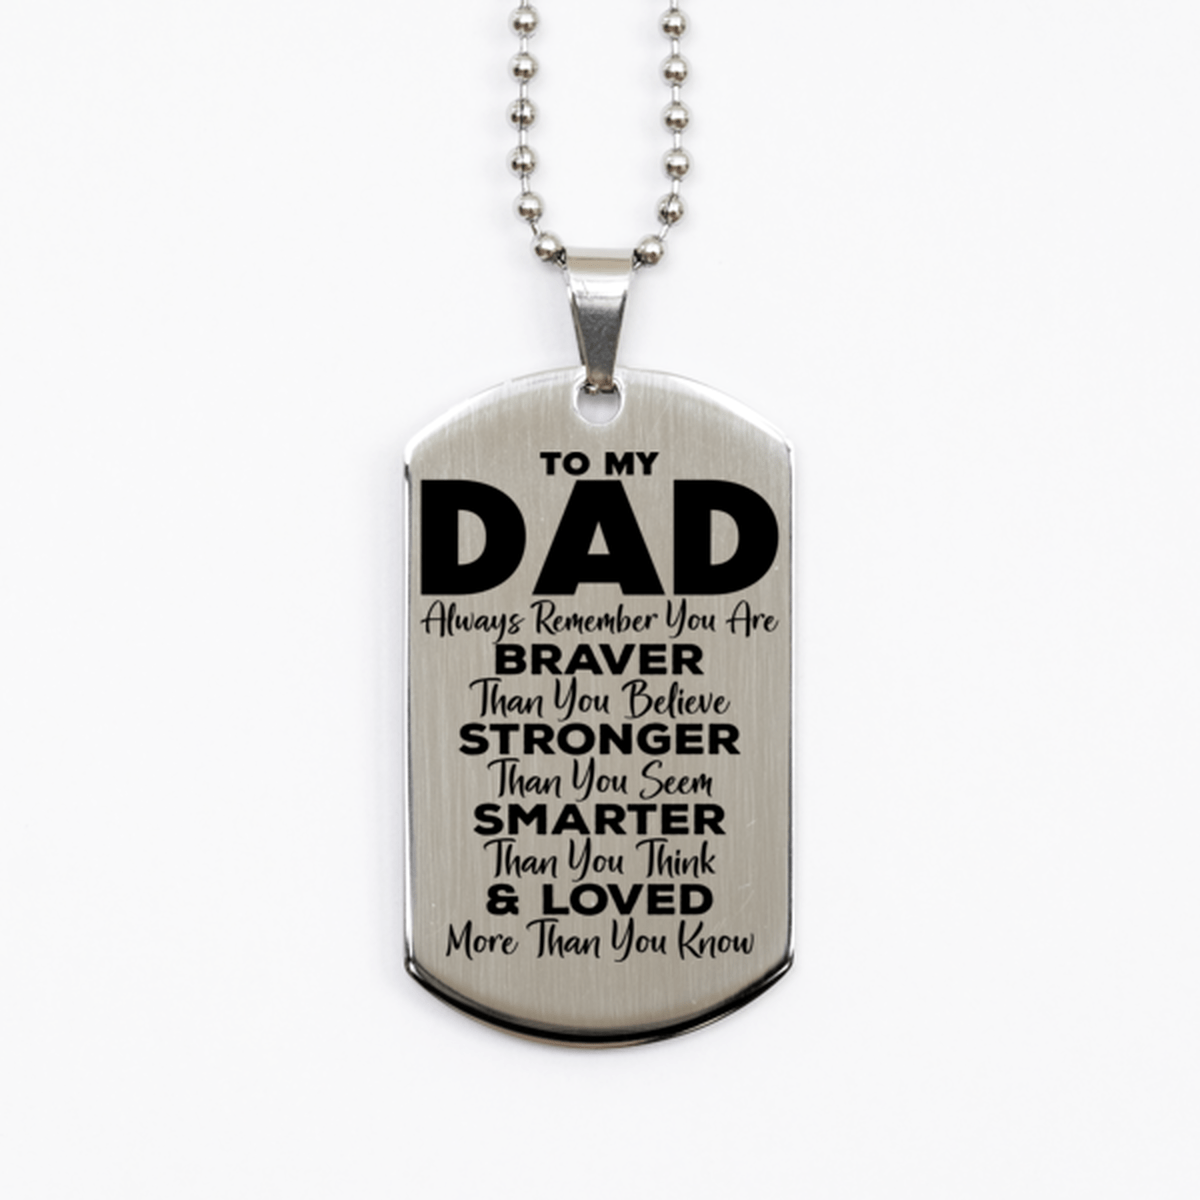 Motivational Dad Silver Dog Tag Necklace, Dad Always Remember You Are Braver Than You Believe, Best Birthday Gifts for Dad